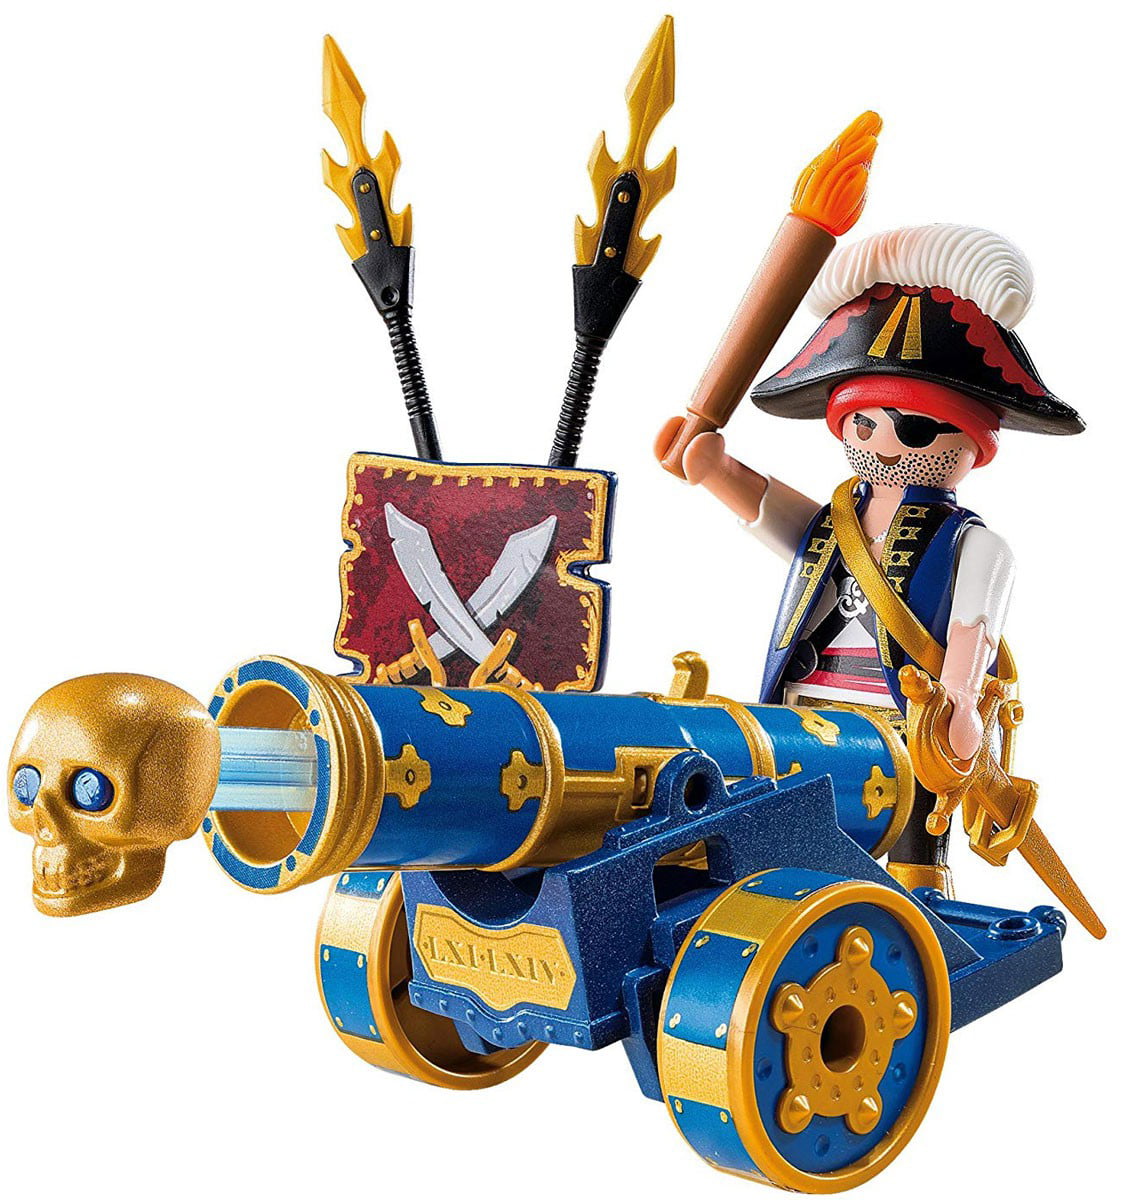 Details about   Playmobil,INTERACTIVE CANNON w PIRATE,LOT OF 4,#6162,6163,6164,6165,NEW IN BAGS 